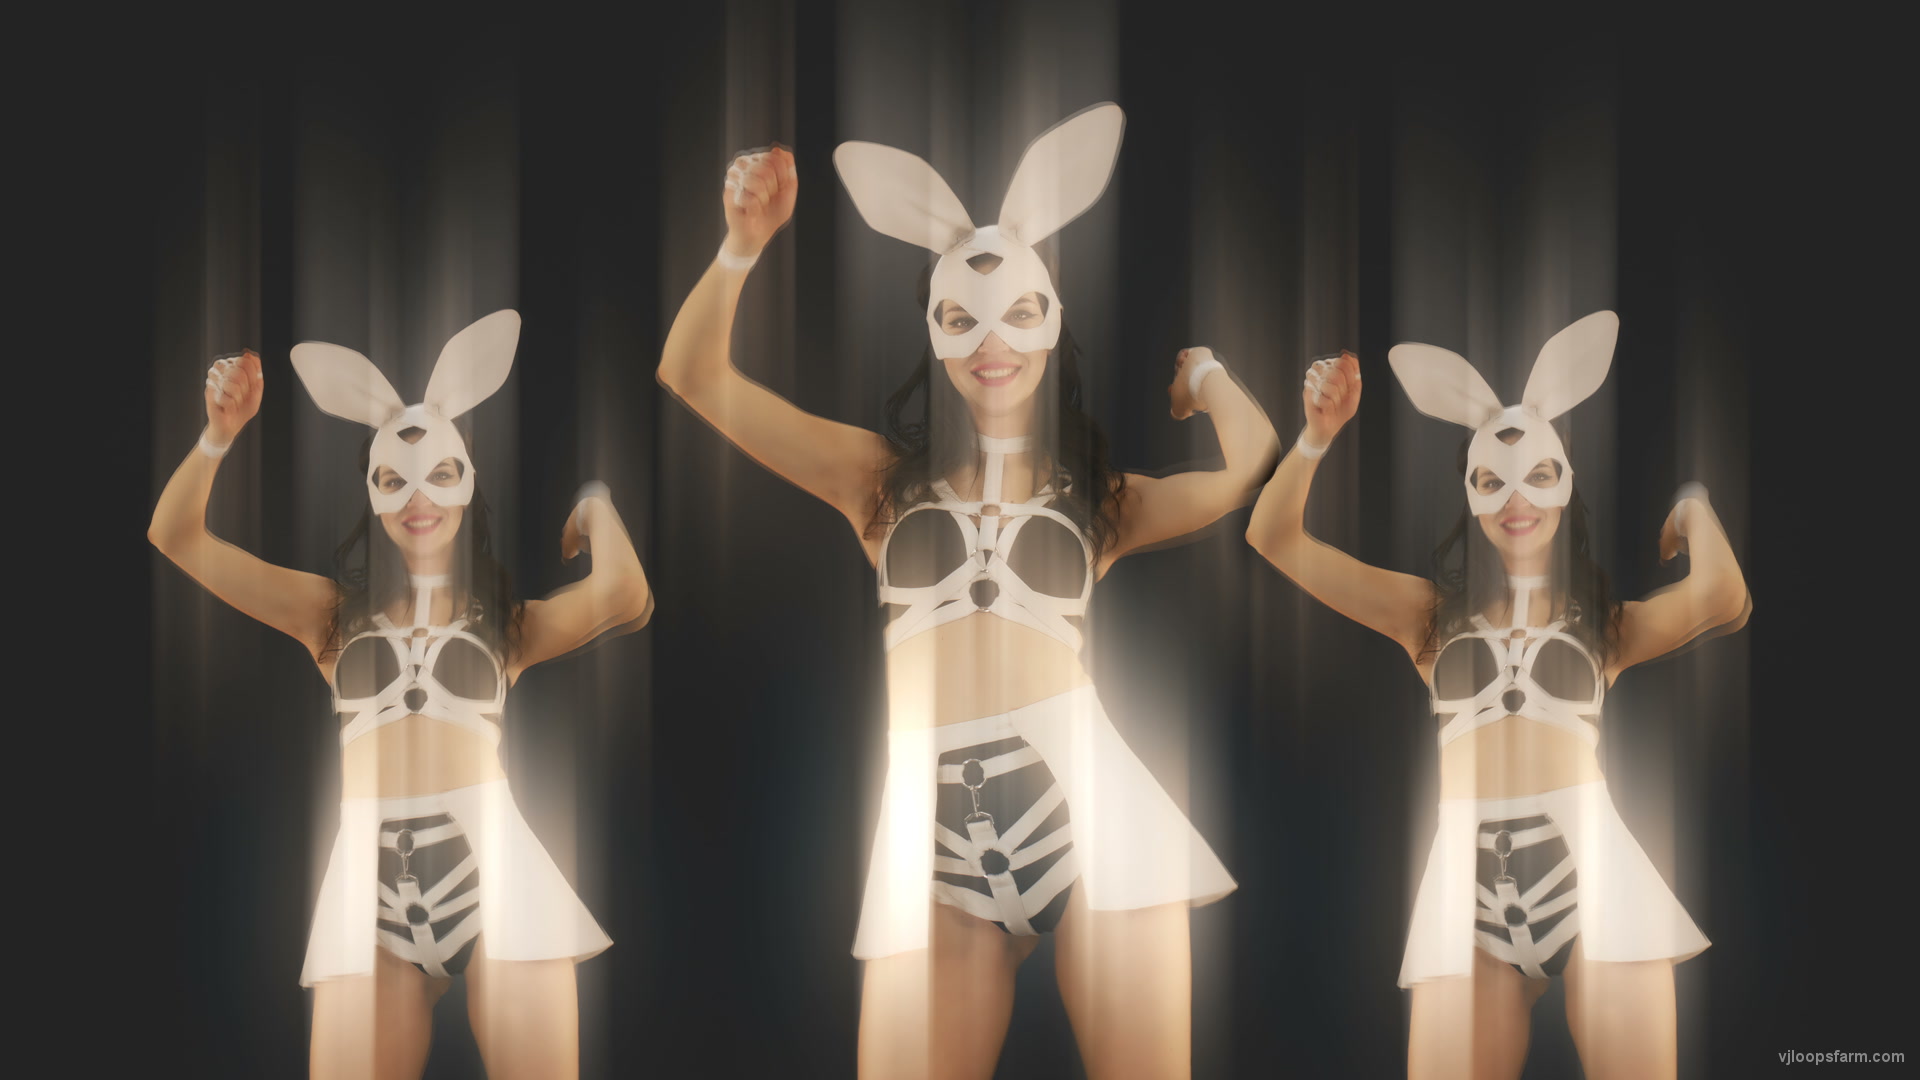 Red Strobing Bunny Beats Girls with Time Displace Effect 4K Video Art Vj Loop